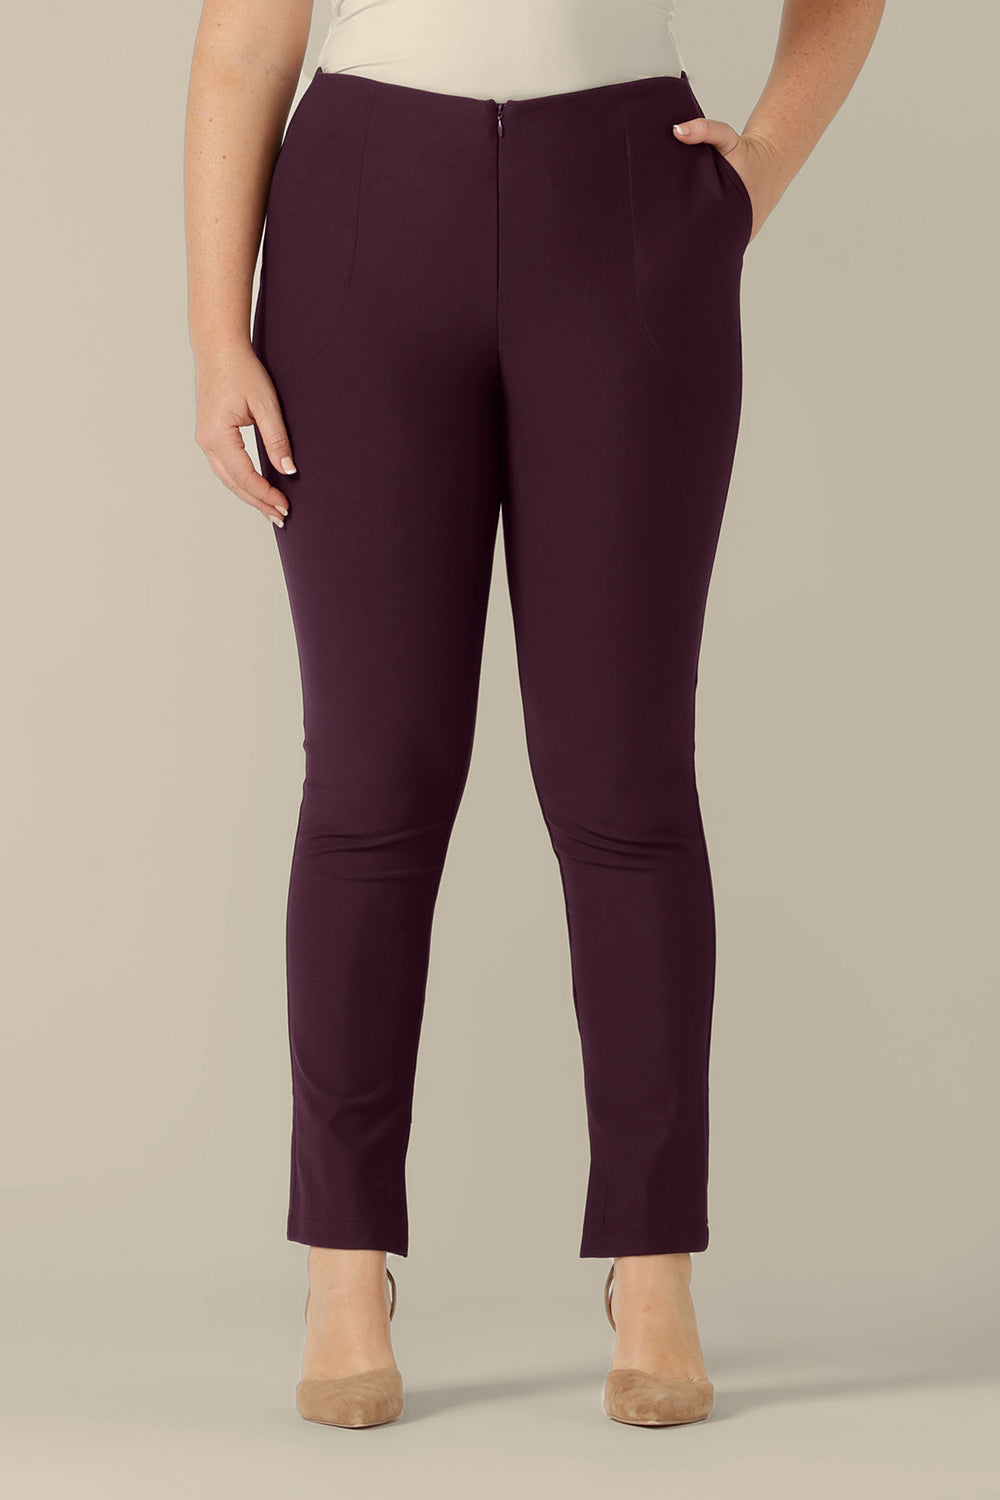  Mid-rise, slim leg pants in mulberry ponte jersey, size 12, by Australia and New Zealand women's clothing label, L&F. Good workwear pants, these comfortable trousers are made for an inclusive size range of sizes 8 to 24.